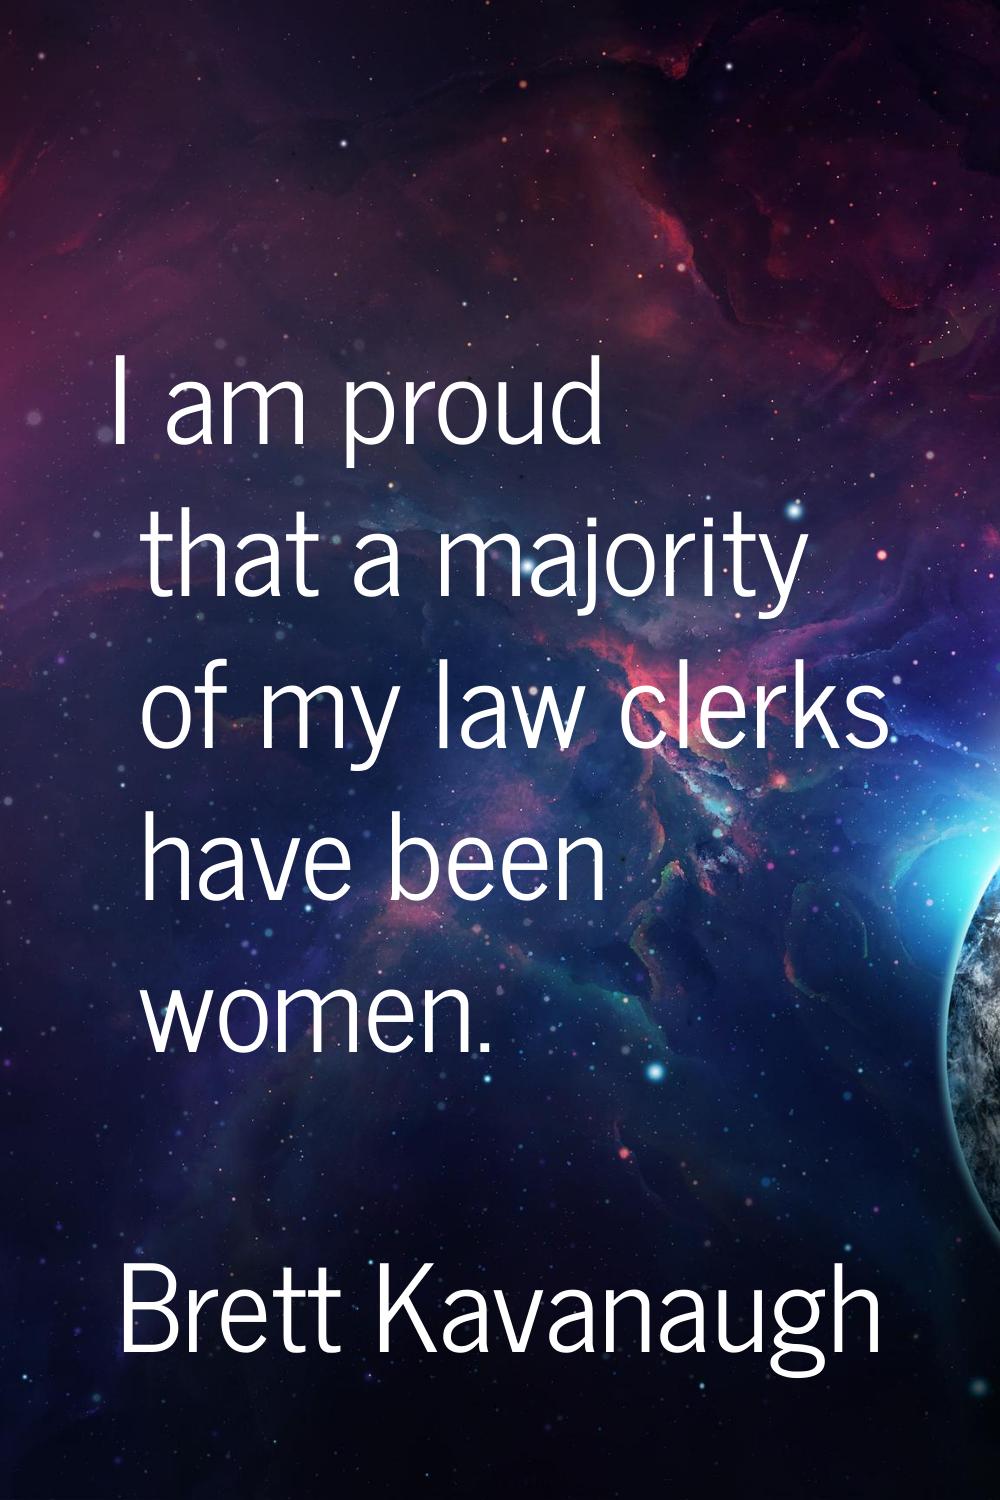 I am proud that a majority of my law clerks have been women.